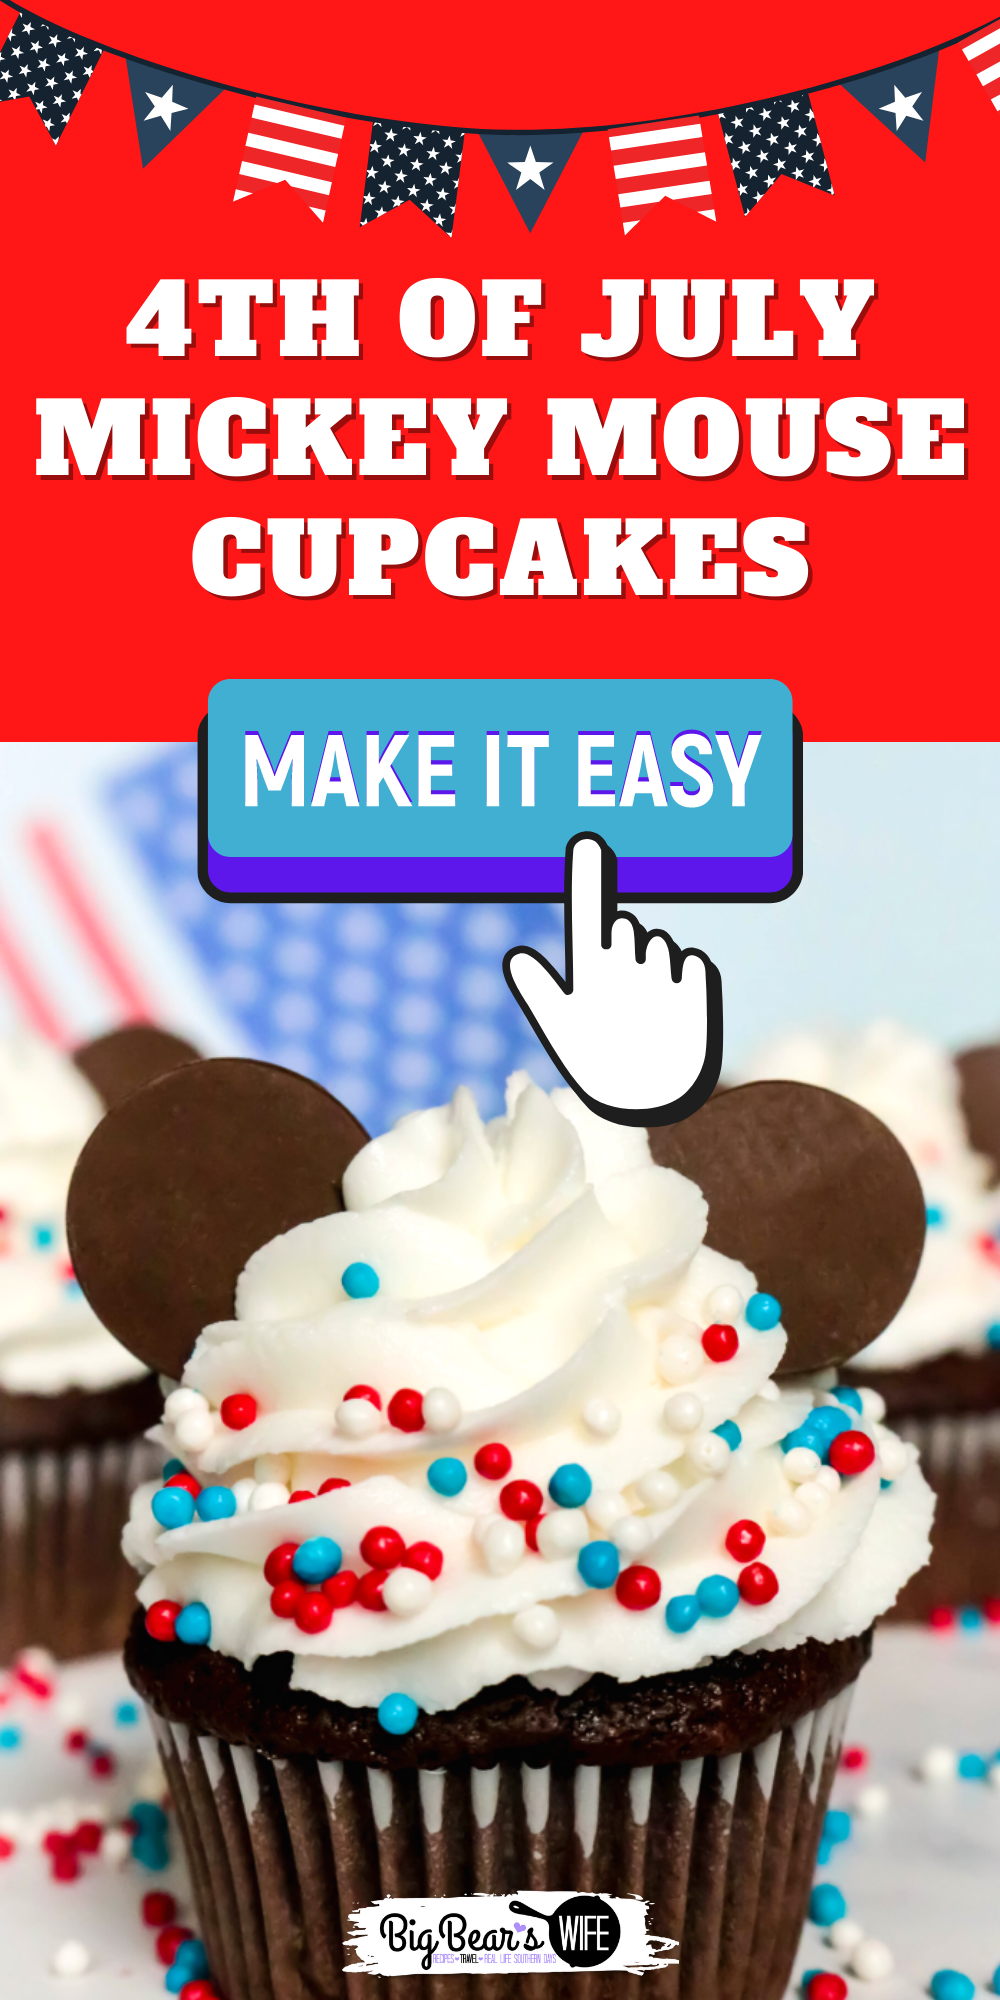 We might not be celebrating the 4th of July at Disney World this year but we're bringing Disney Magic home with these fun and festive 4th of July Mickey Mouse Cupcakes! These are perfect for any patriotic holiday! via @bigbearswife